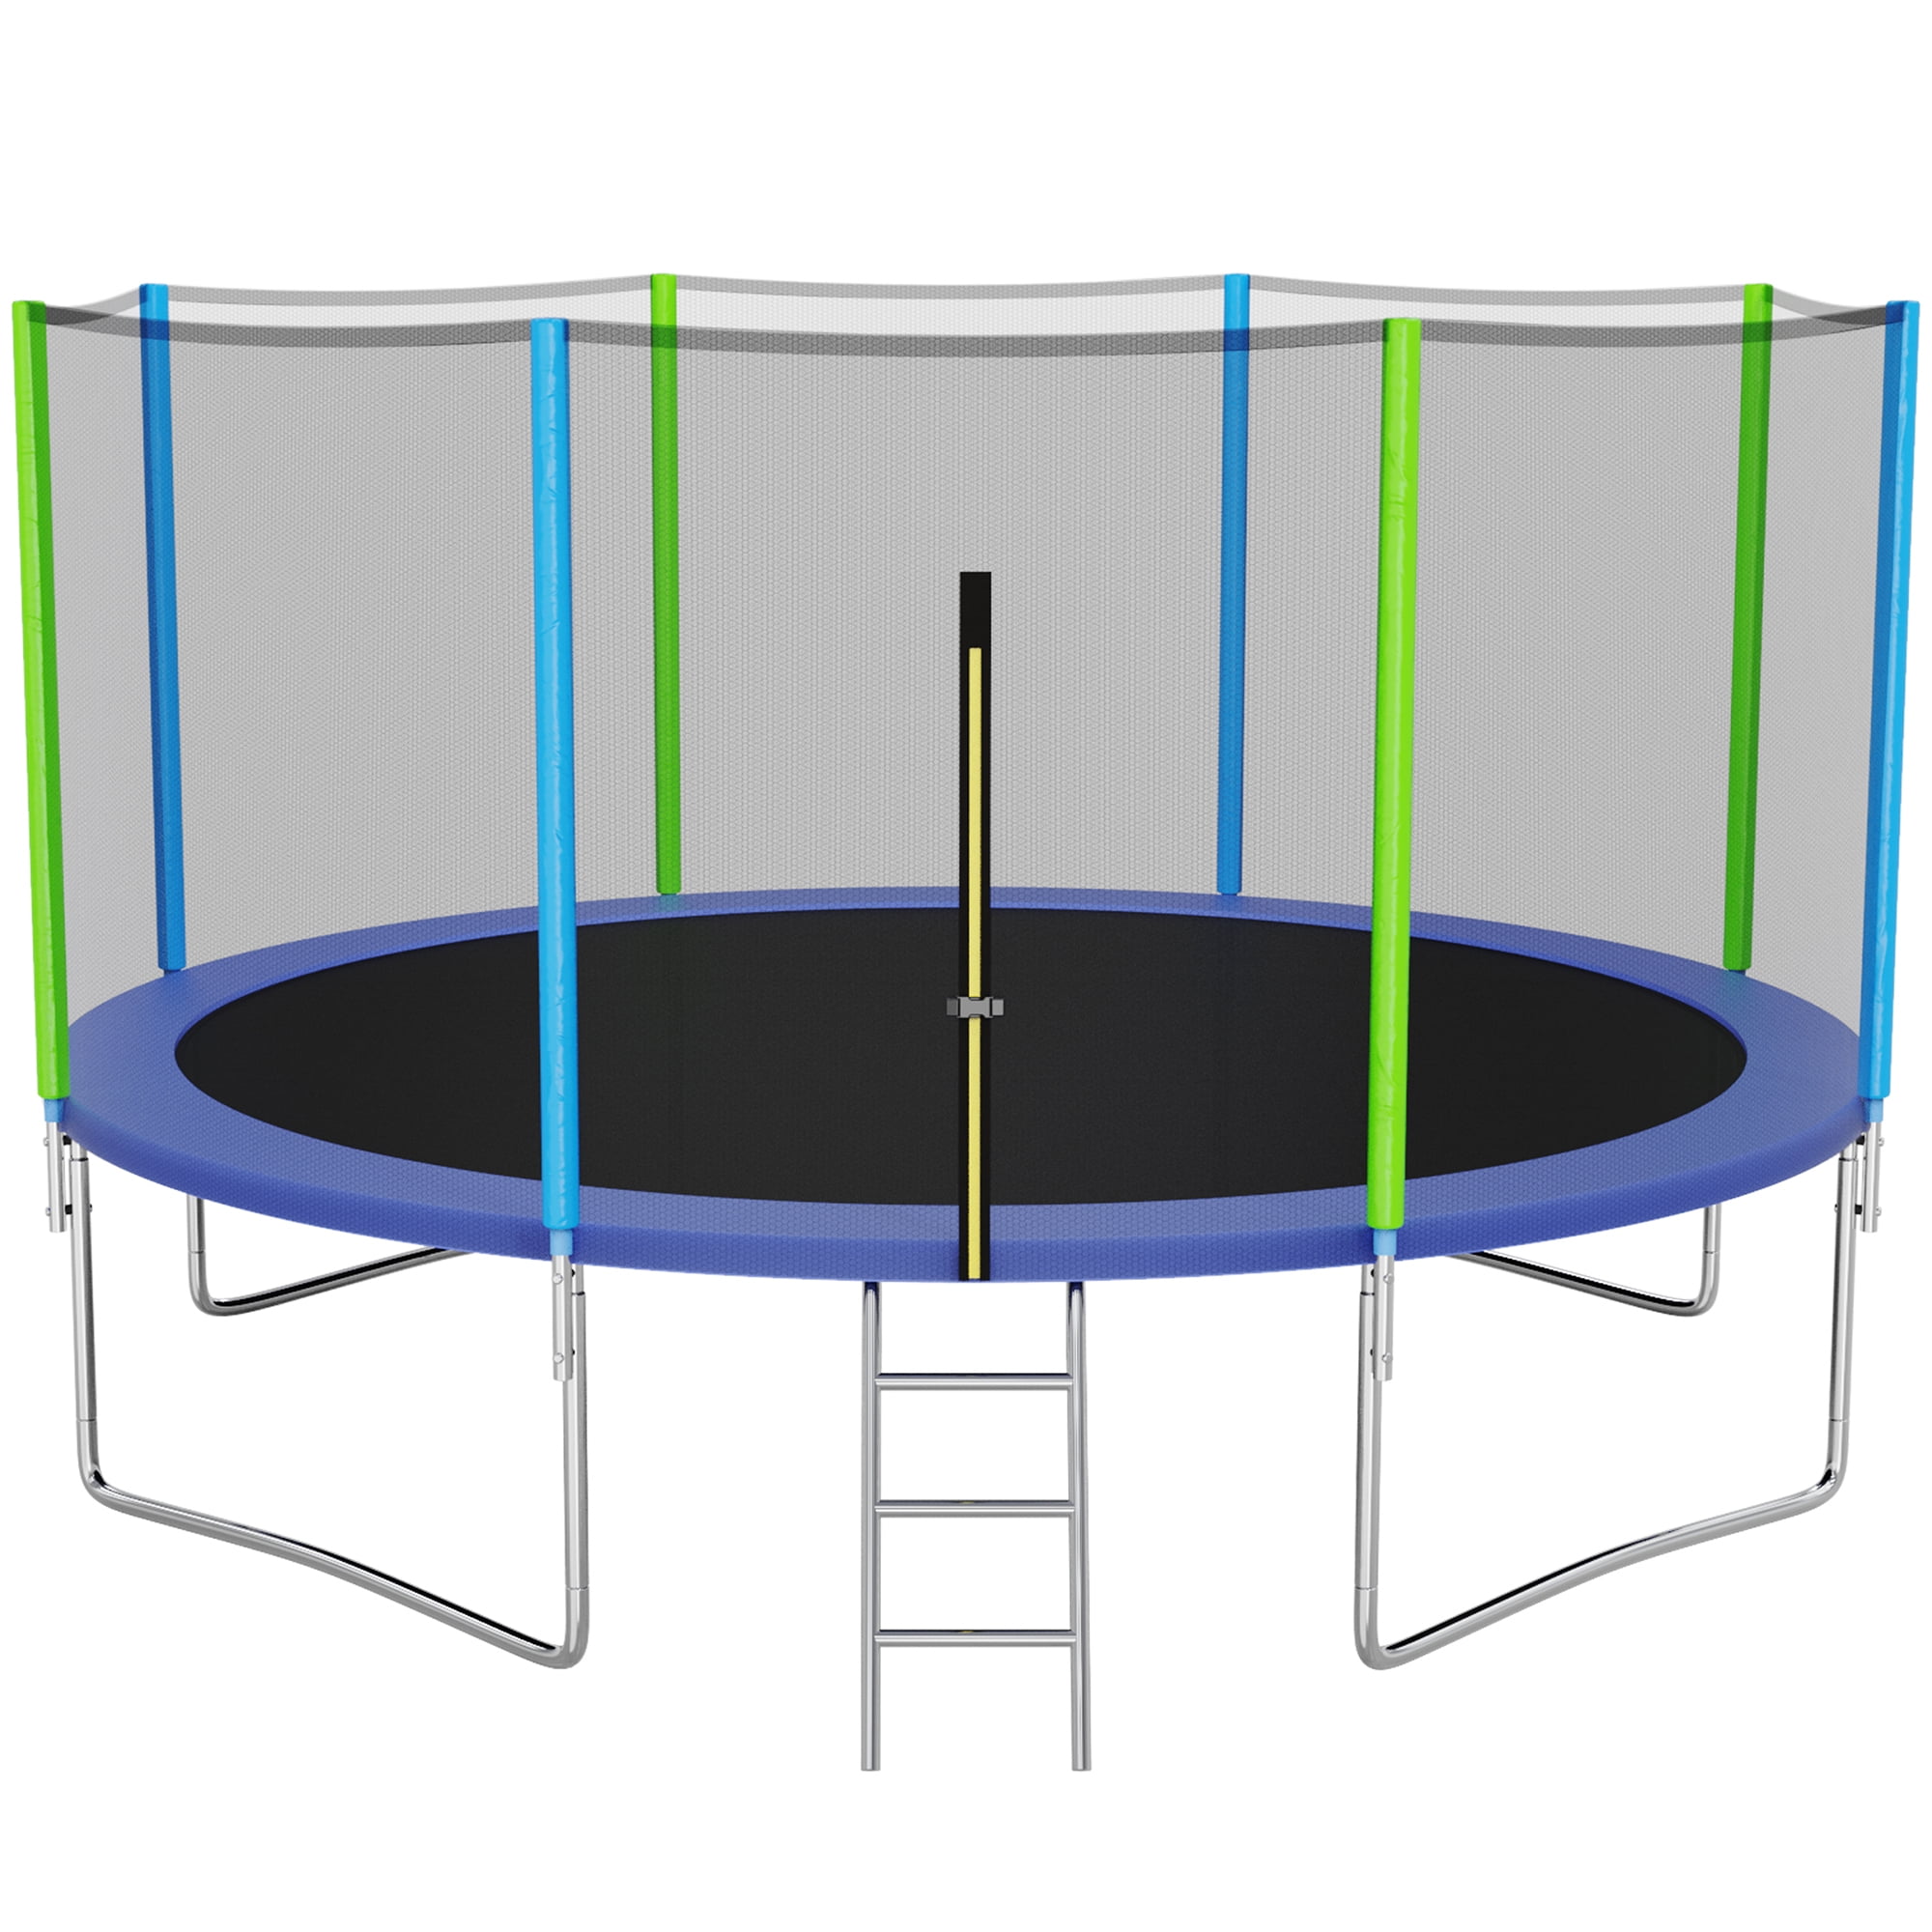 YORIN 1000LBS 12FT 14FT Trampoline for Kids Adults, Outdoor Trampoline with Safety Enclosure Net, Recreational with Ladder, Heavy Duty No Gap Design Trampoline for 5-6 Kids -